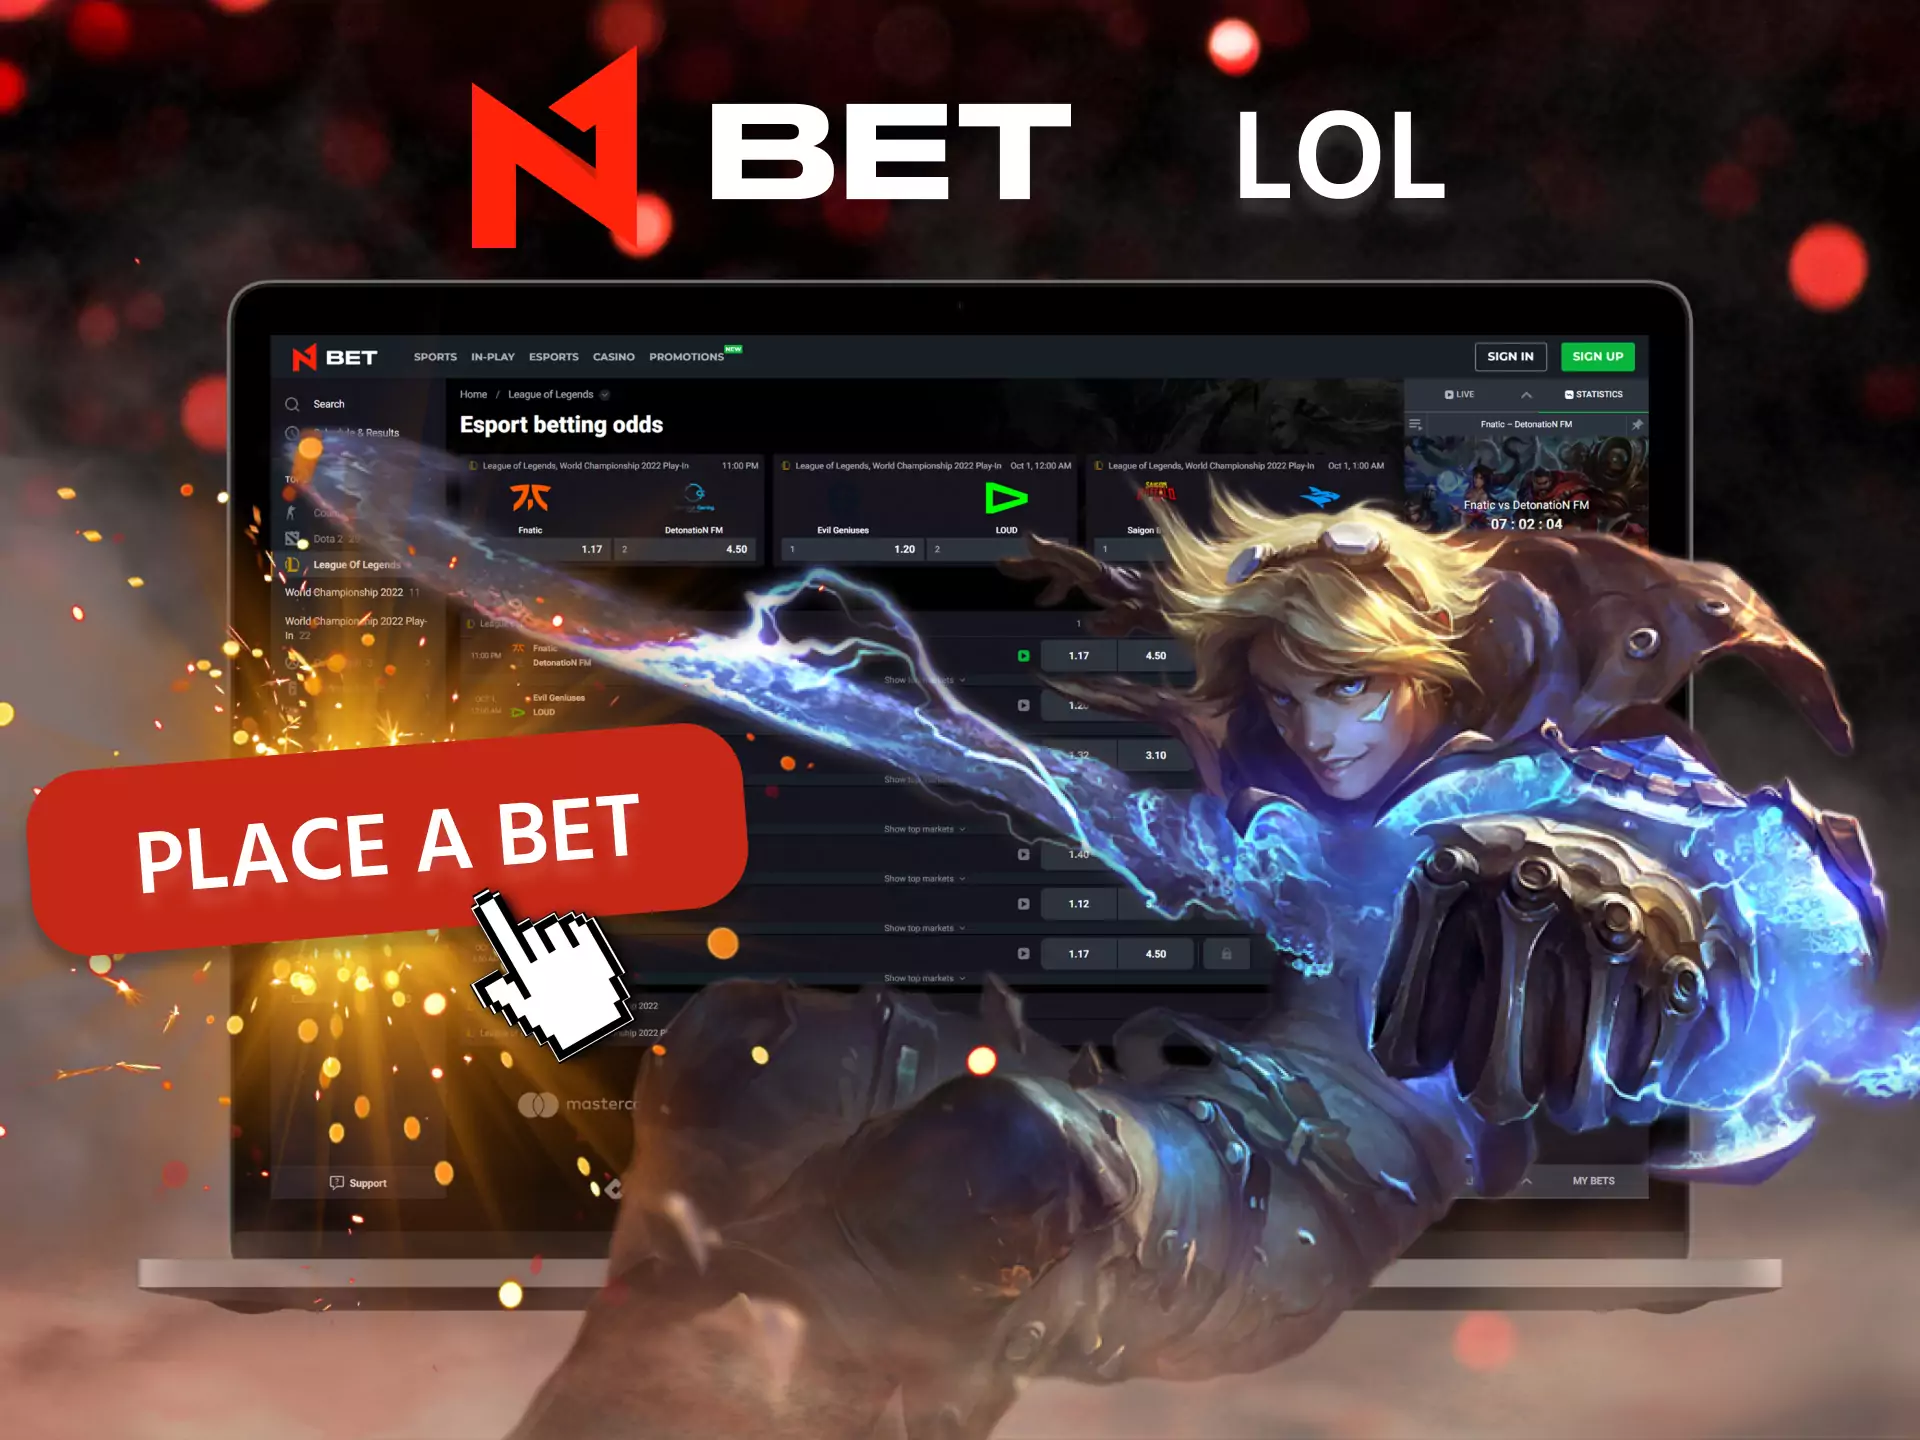 Place bets on League of Legends in N1Bet.